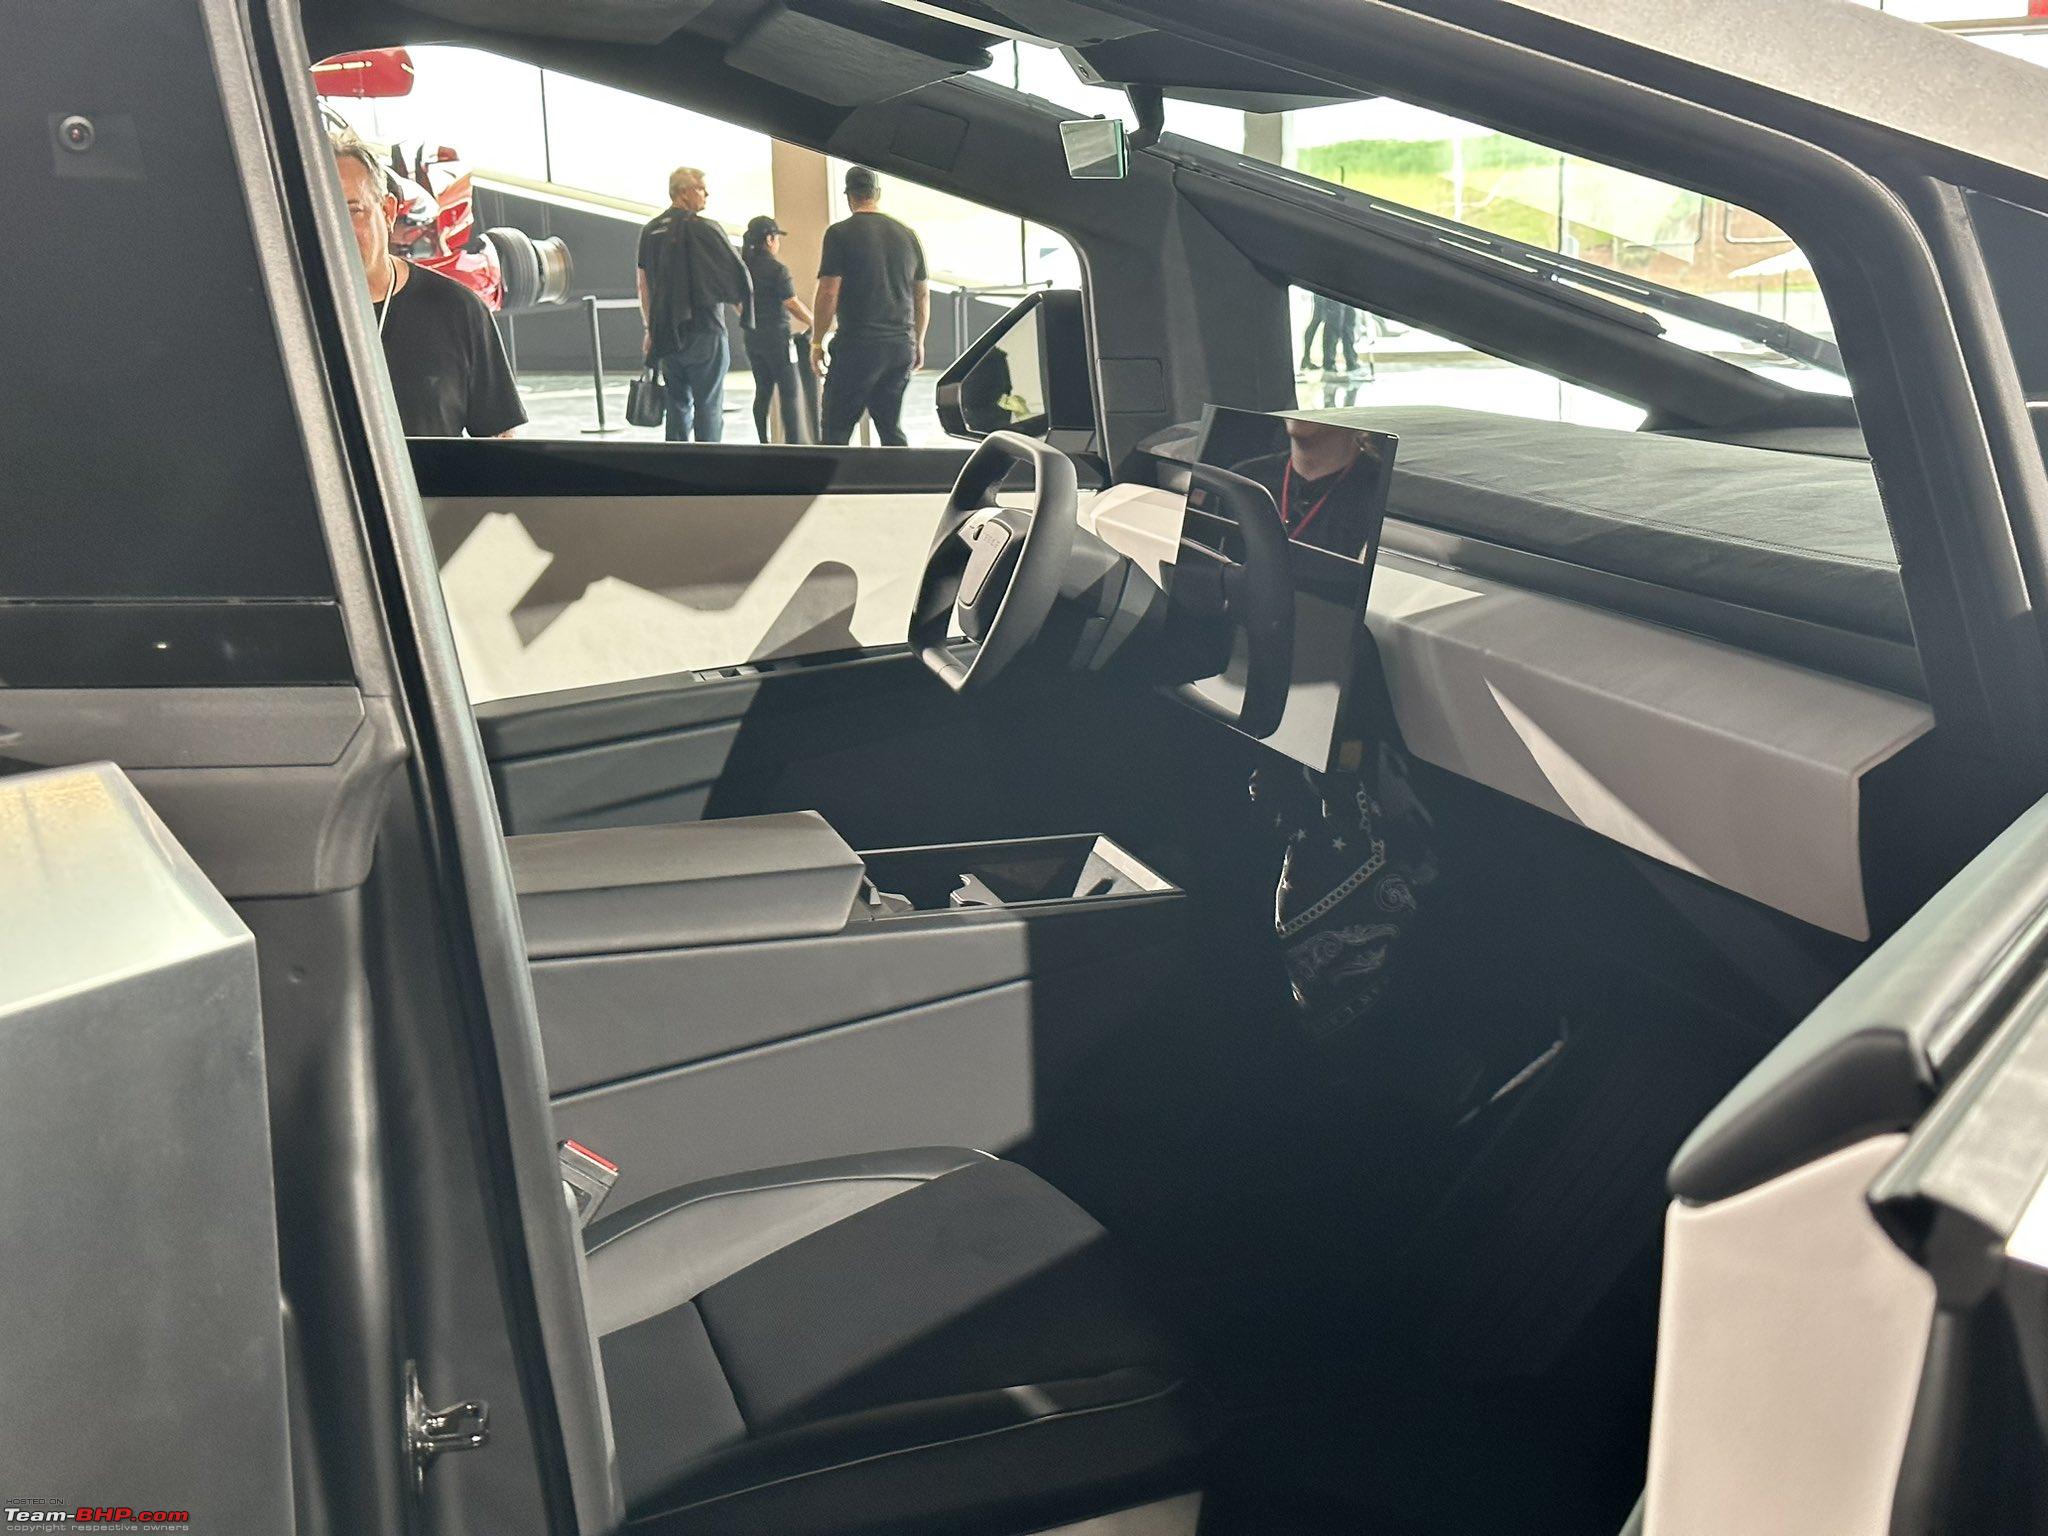 Tesla's clean exterior and minimalist interior are now preferred